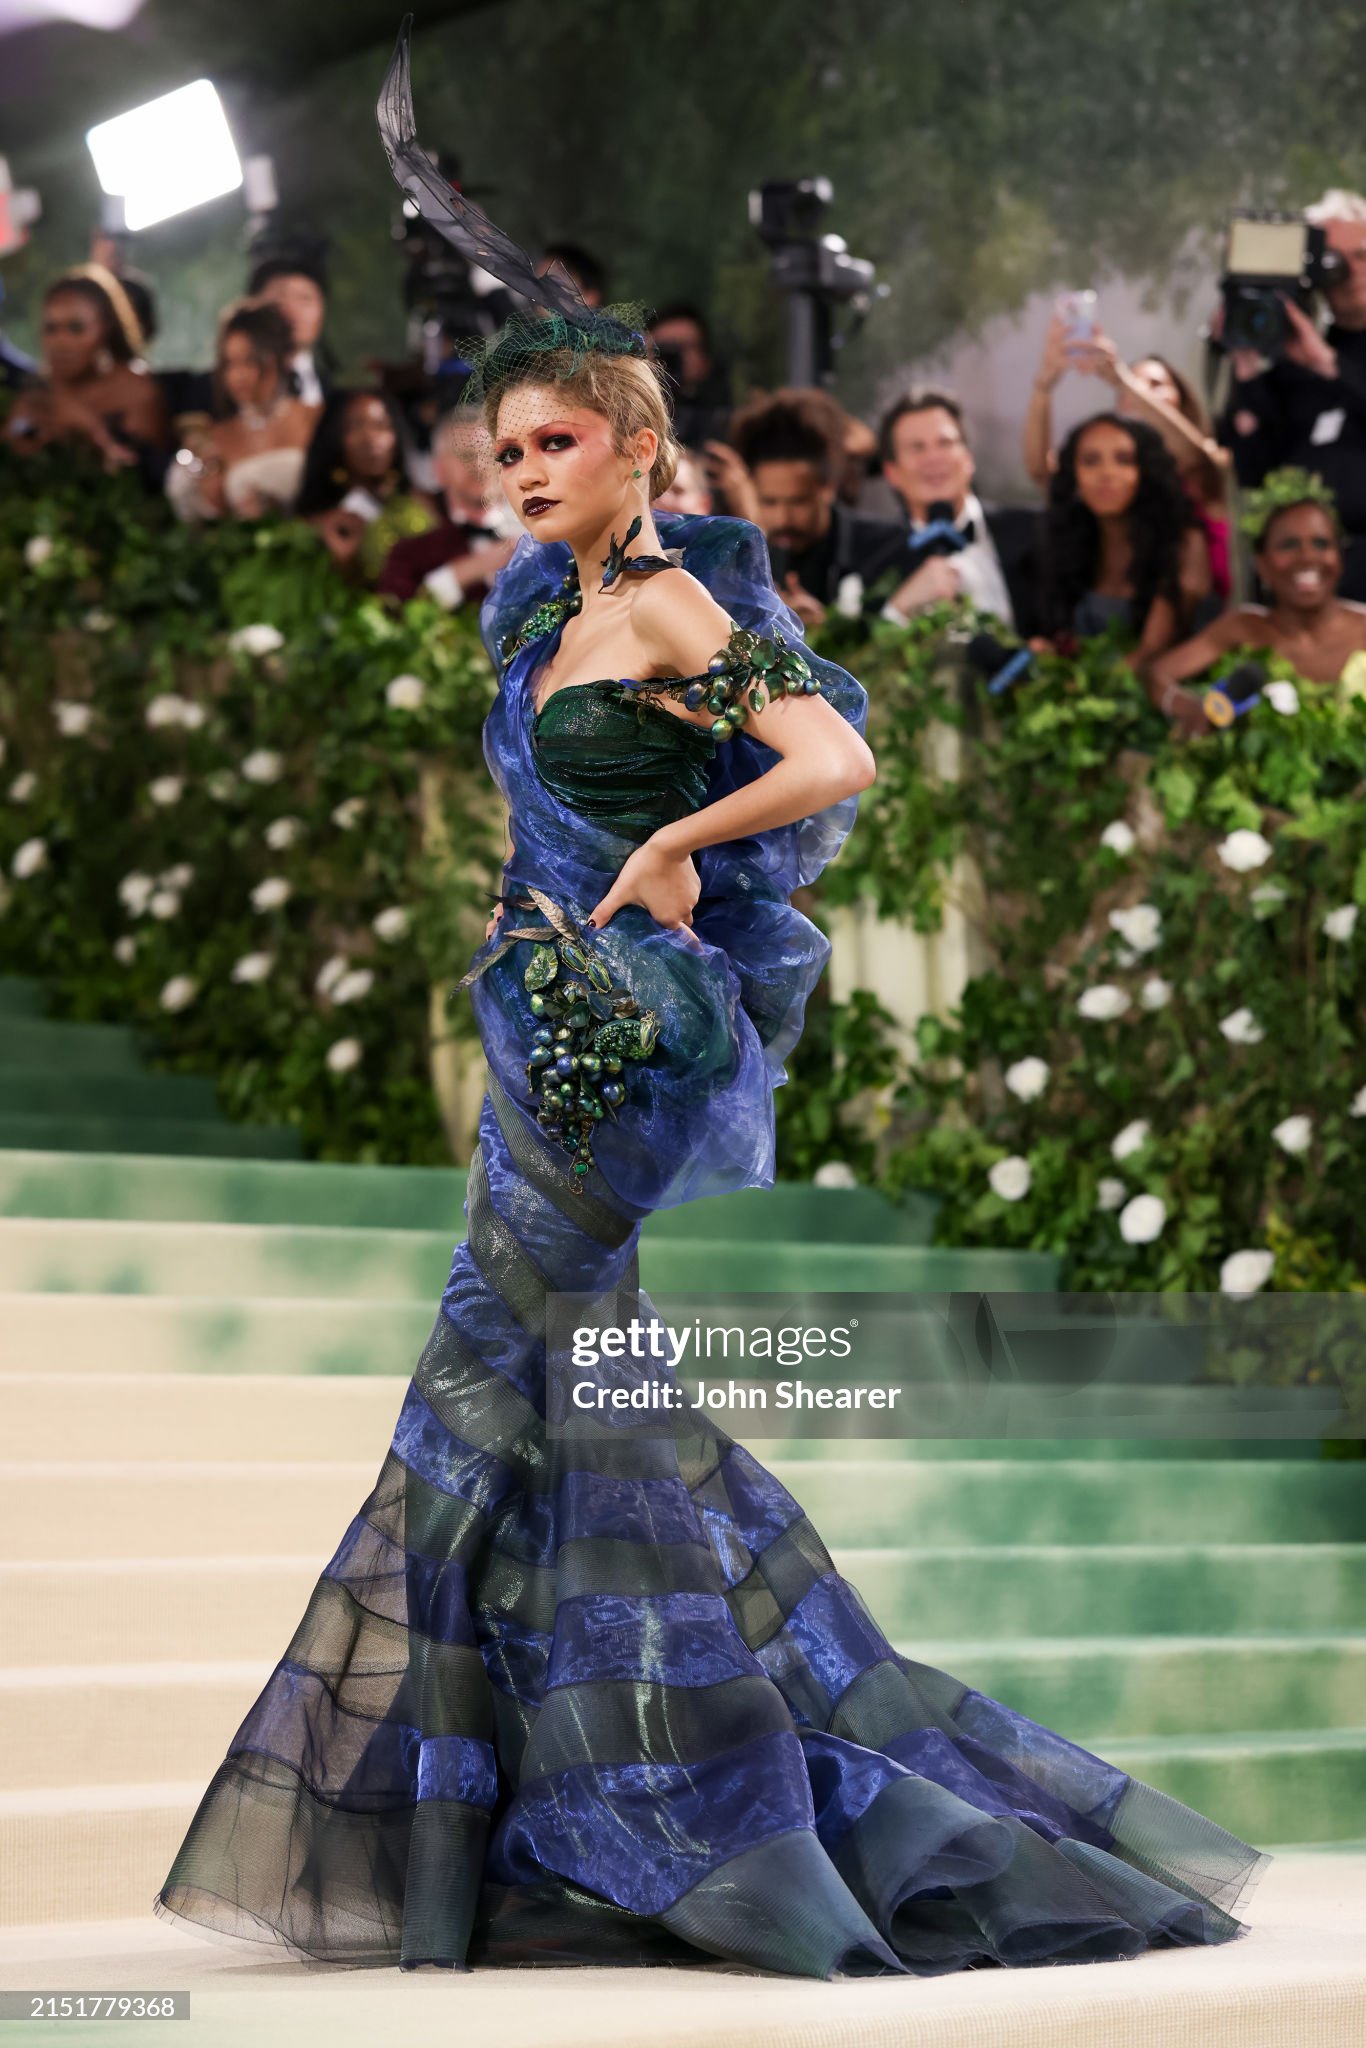 gettyimages-2151779368-2048x2048.jpg